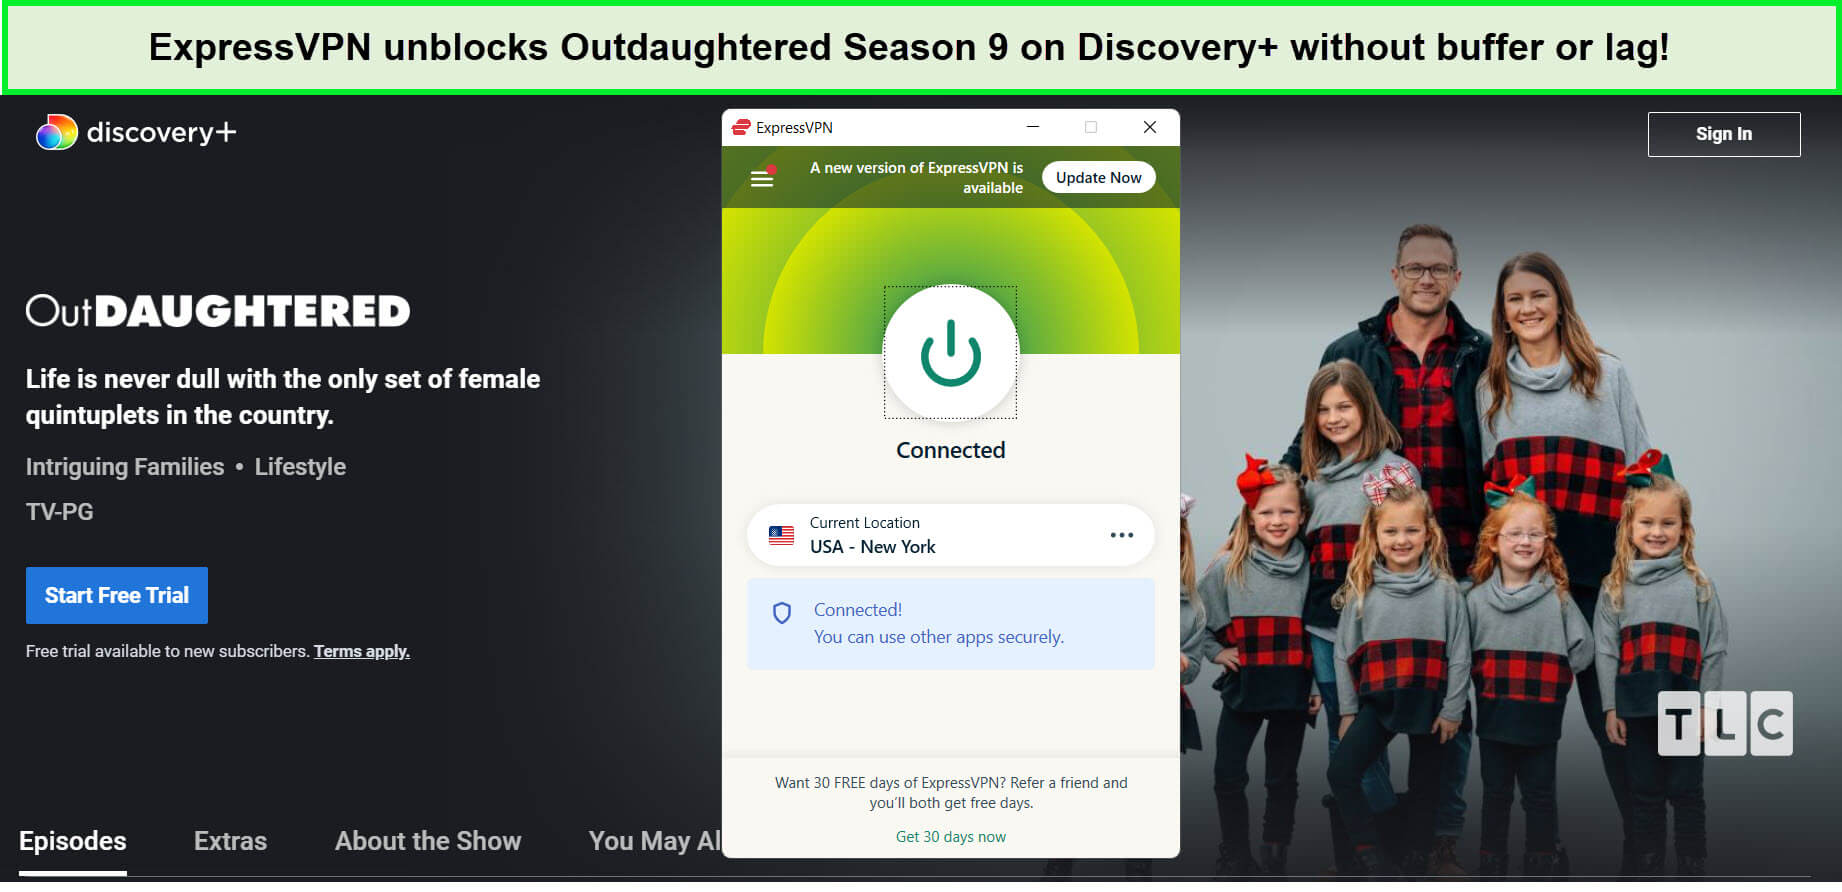 expressvpn-unblocks-outdaughtered-season-nine-on-discovery-plus-in-UK